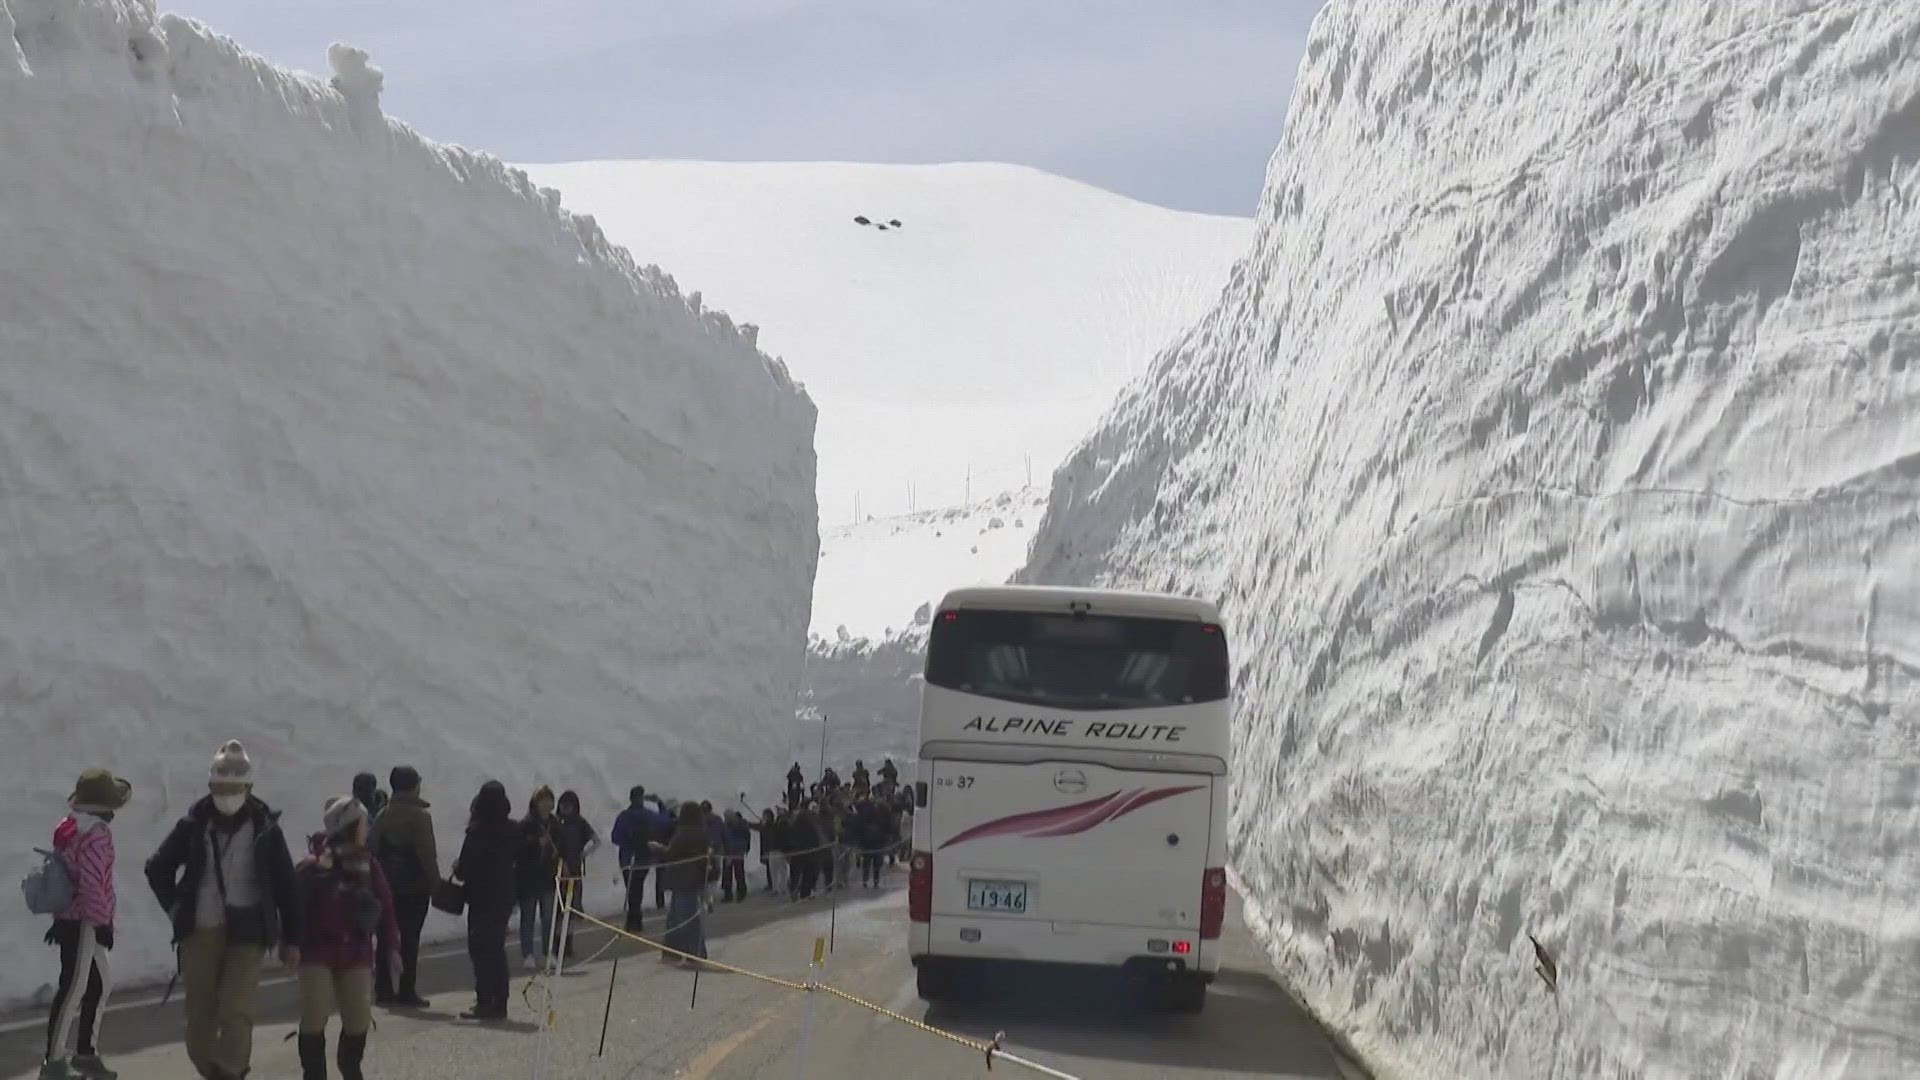 After a long winter, a unique sightseeing opportunity is once again open to tourists in a mountainous region in central Japan.